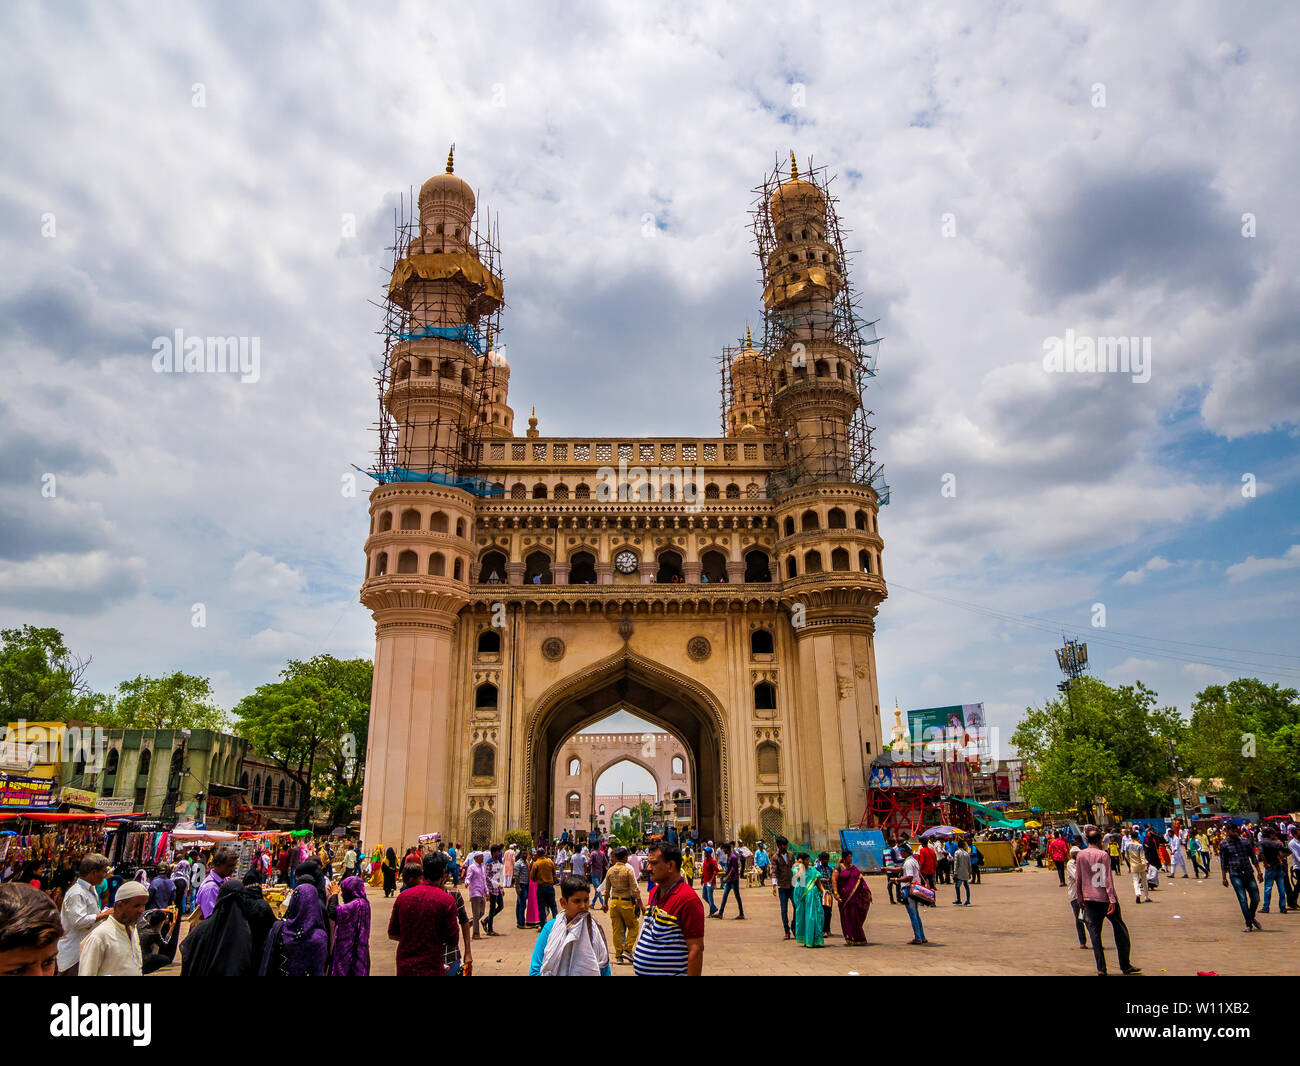 Hyderabad, India - June 17, 2019 : The Charminar, symbol of hyderabad, iconic monument and mosque in India visited by tourists Stock Photo